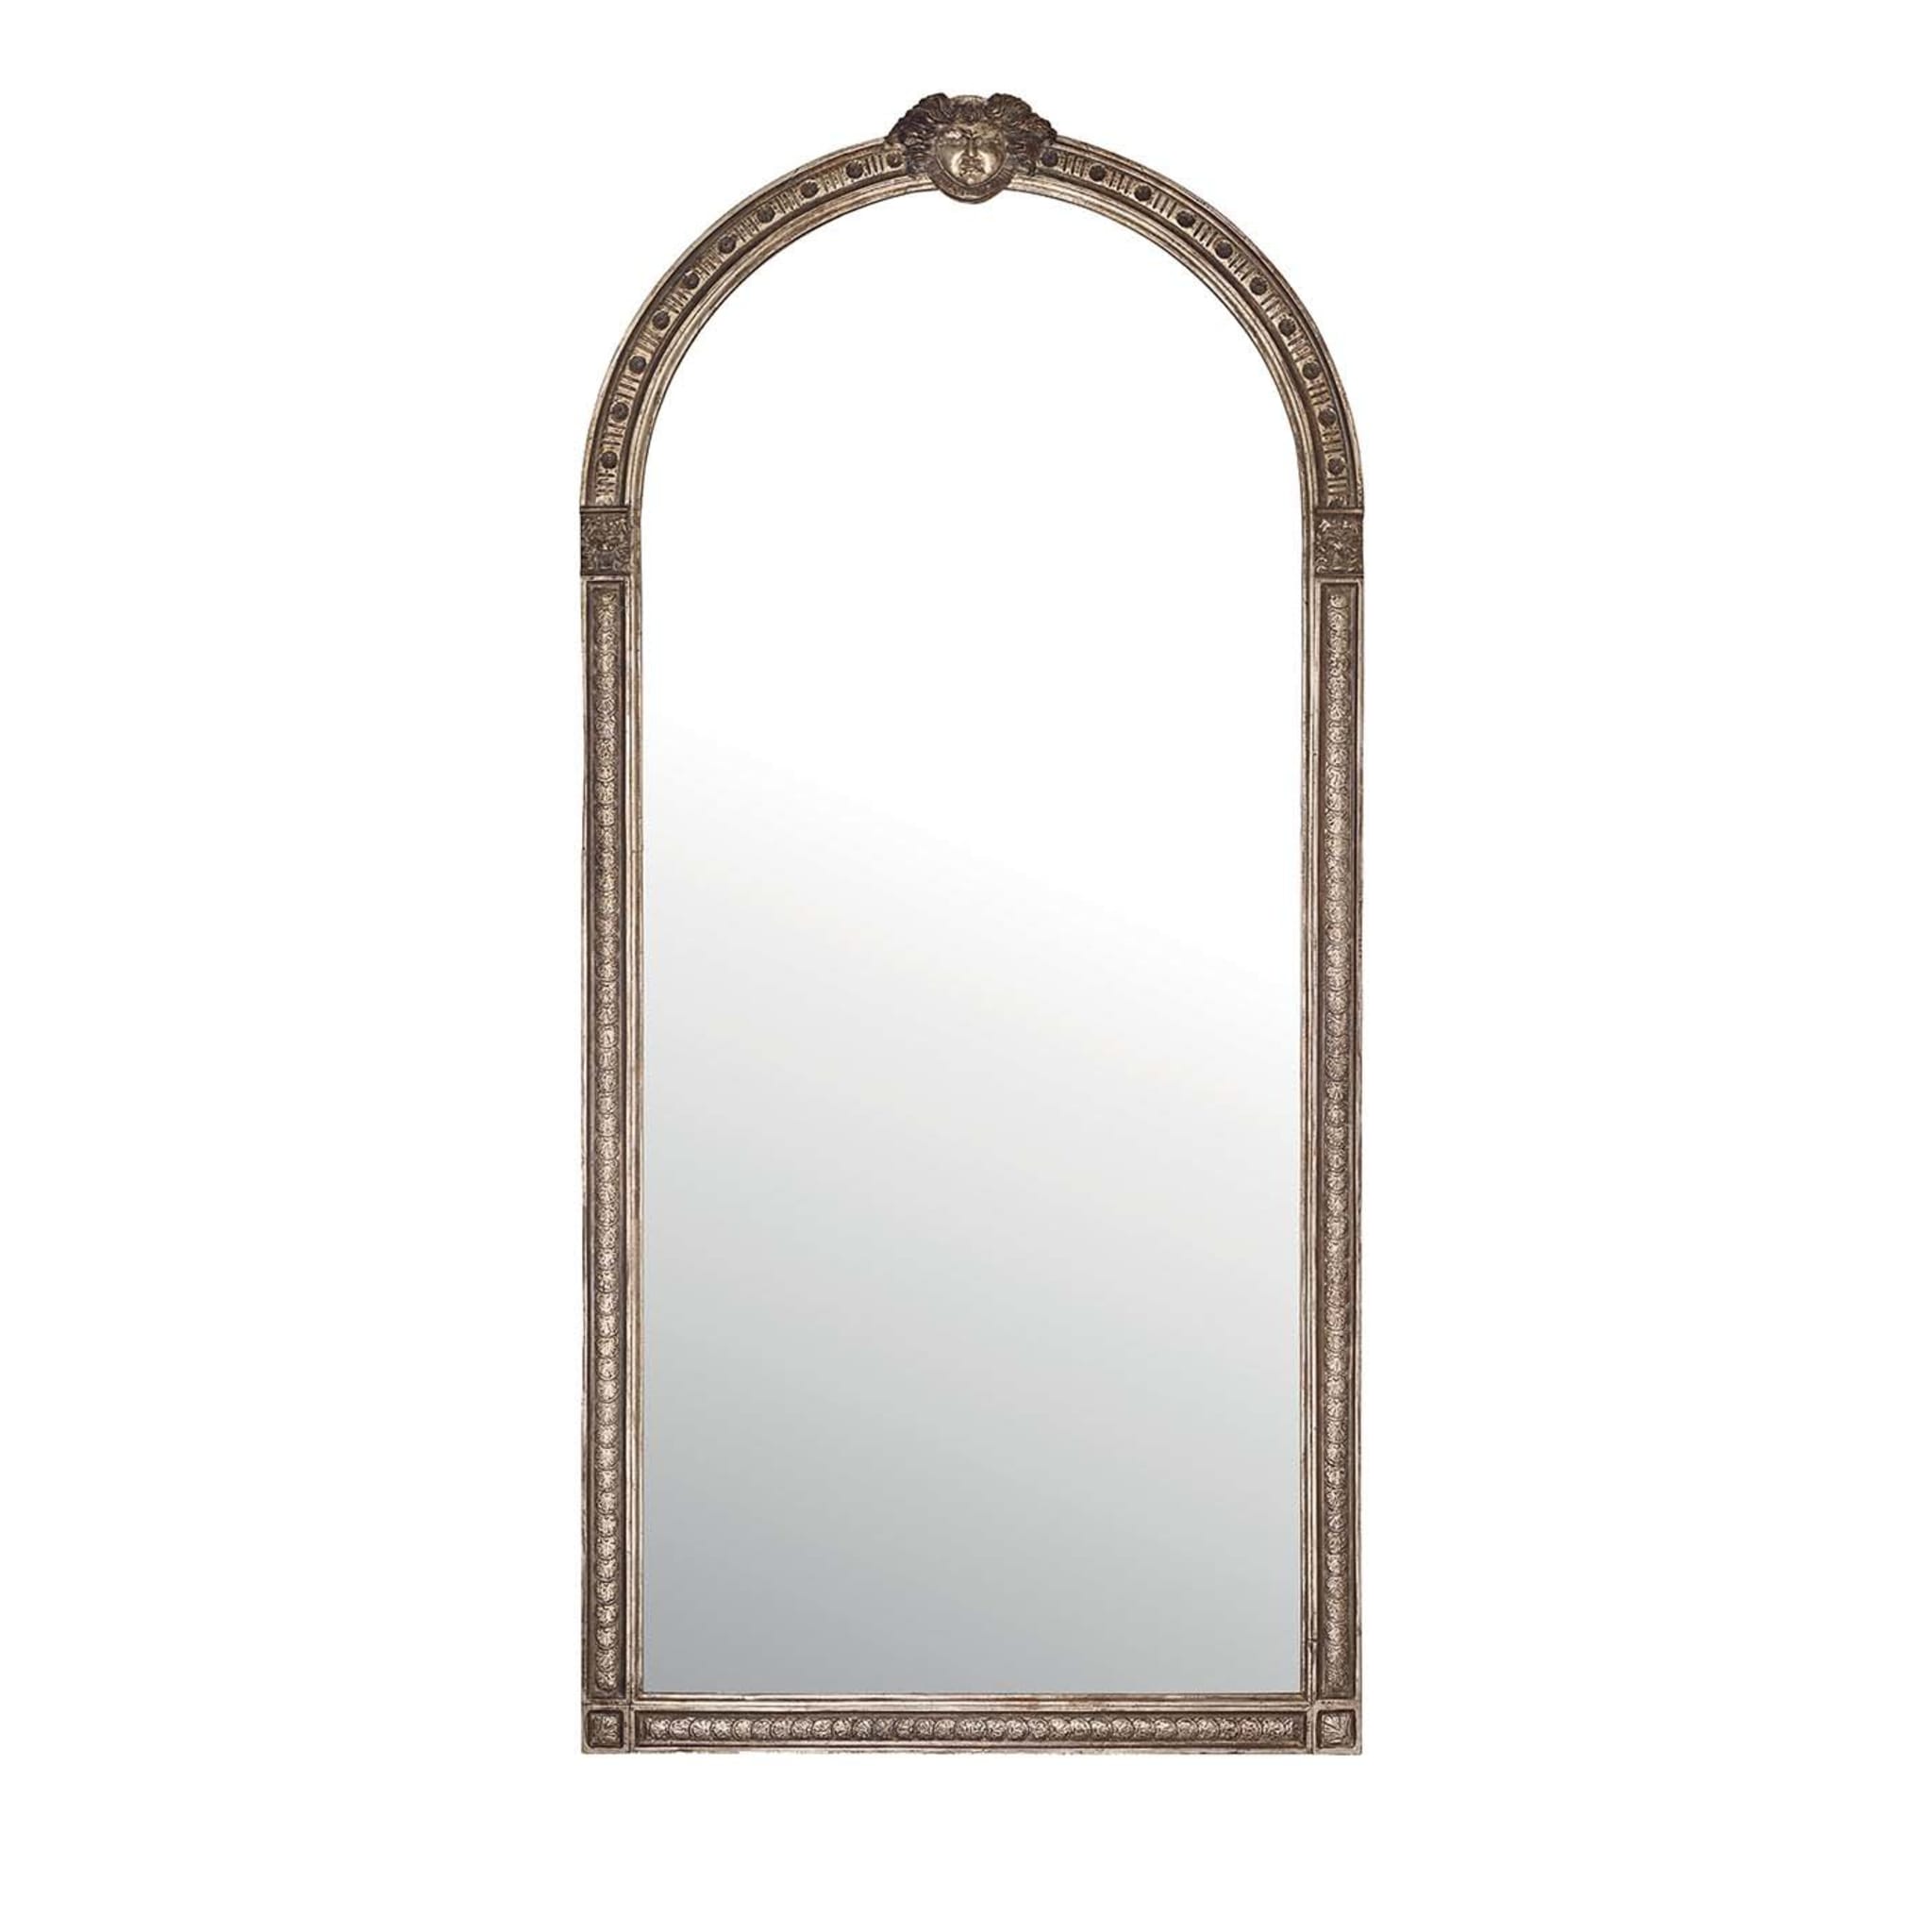 Archway Wall Mirror in Lime Wood - Main view